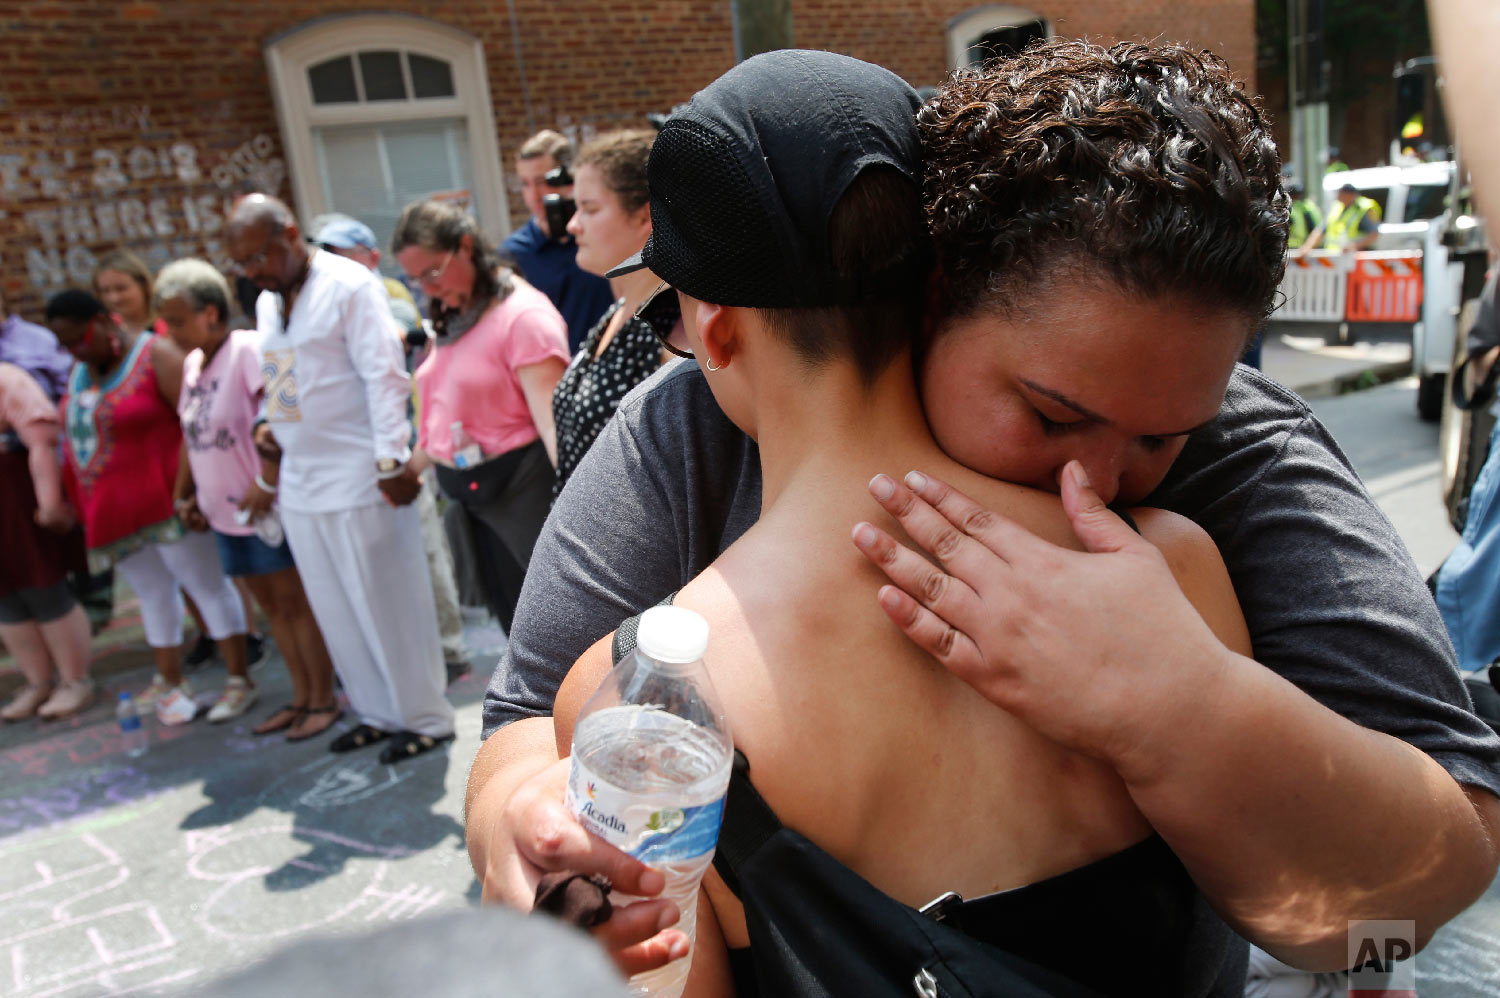  A couple embrace as they participate in prayers at the intersection where Heather Heyer was killed last year as they mark the anniversary of the Unite the Right rally in Charlottesville, Va., Sunday, Aug. 12, 2018. On that day, white supremacists an